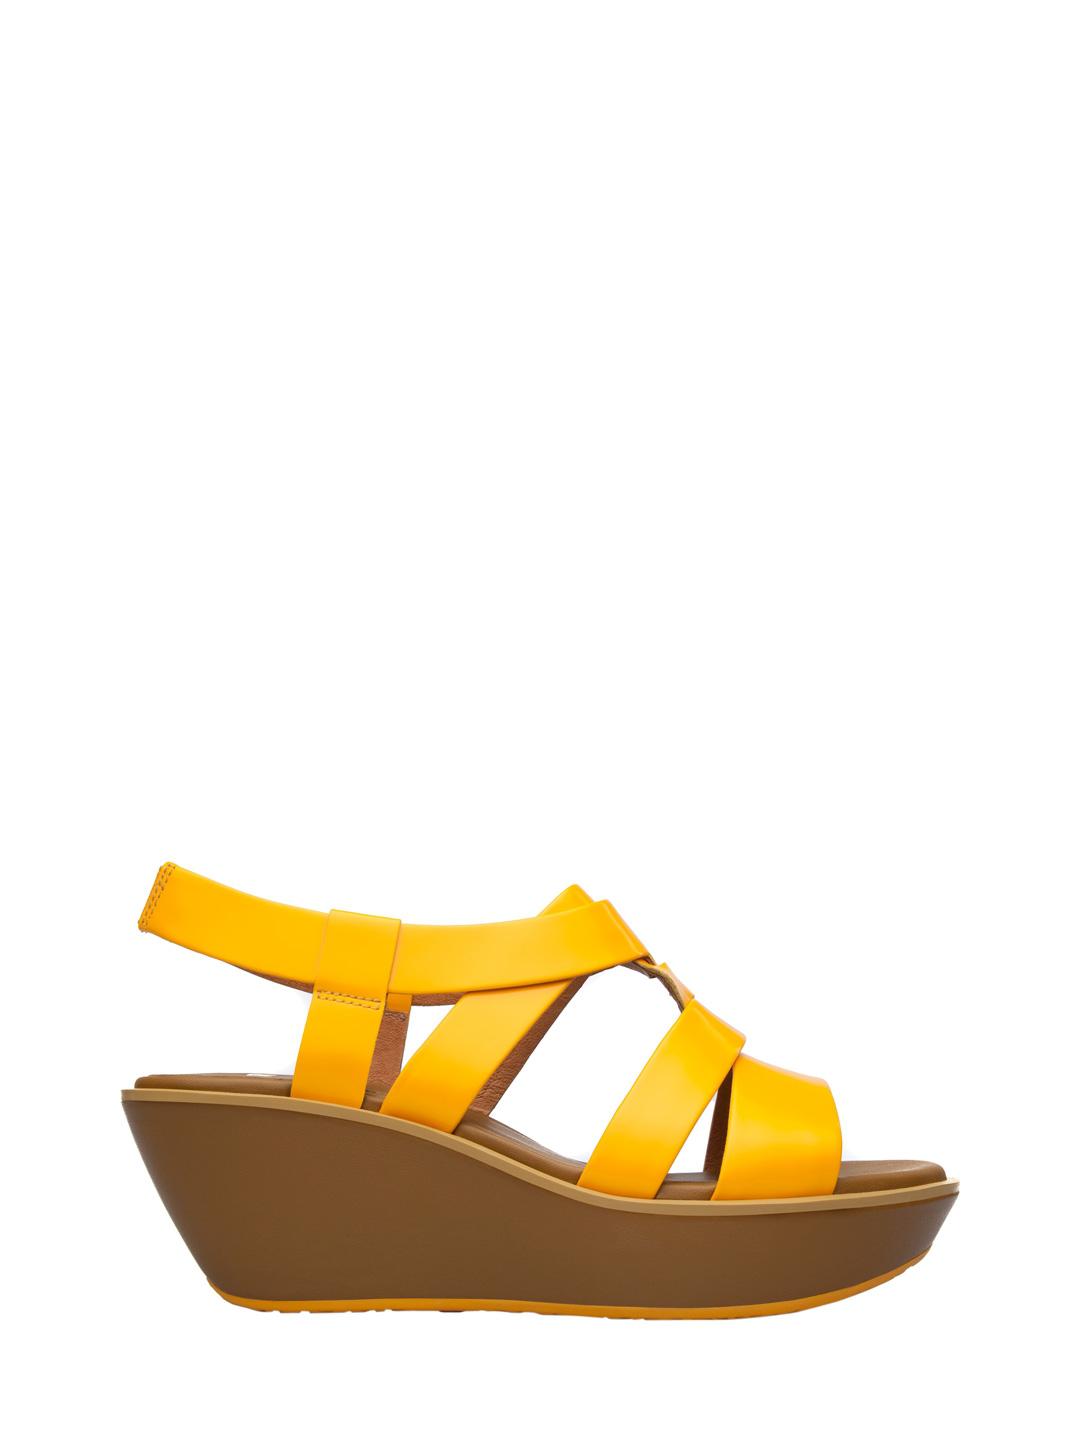 Camper Damas Leather Wedge Sandal in Yellow - Lyst